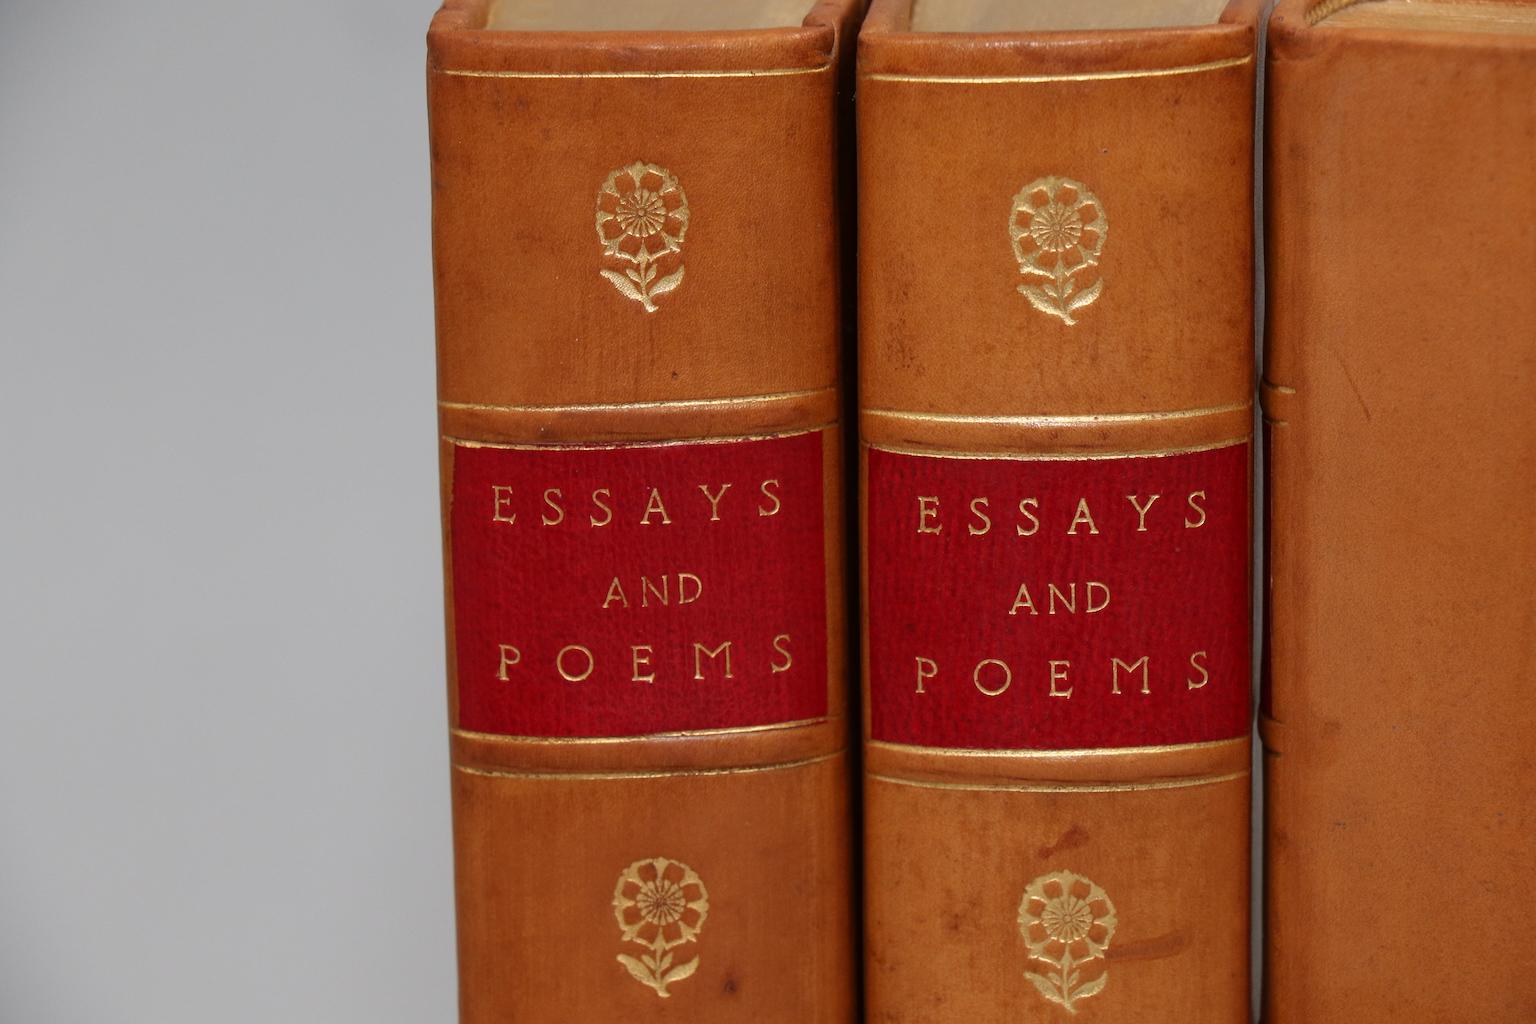 American Books, The Essays and Poems of Thomas A. Macaulay